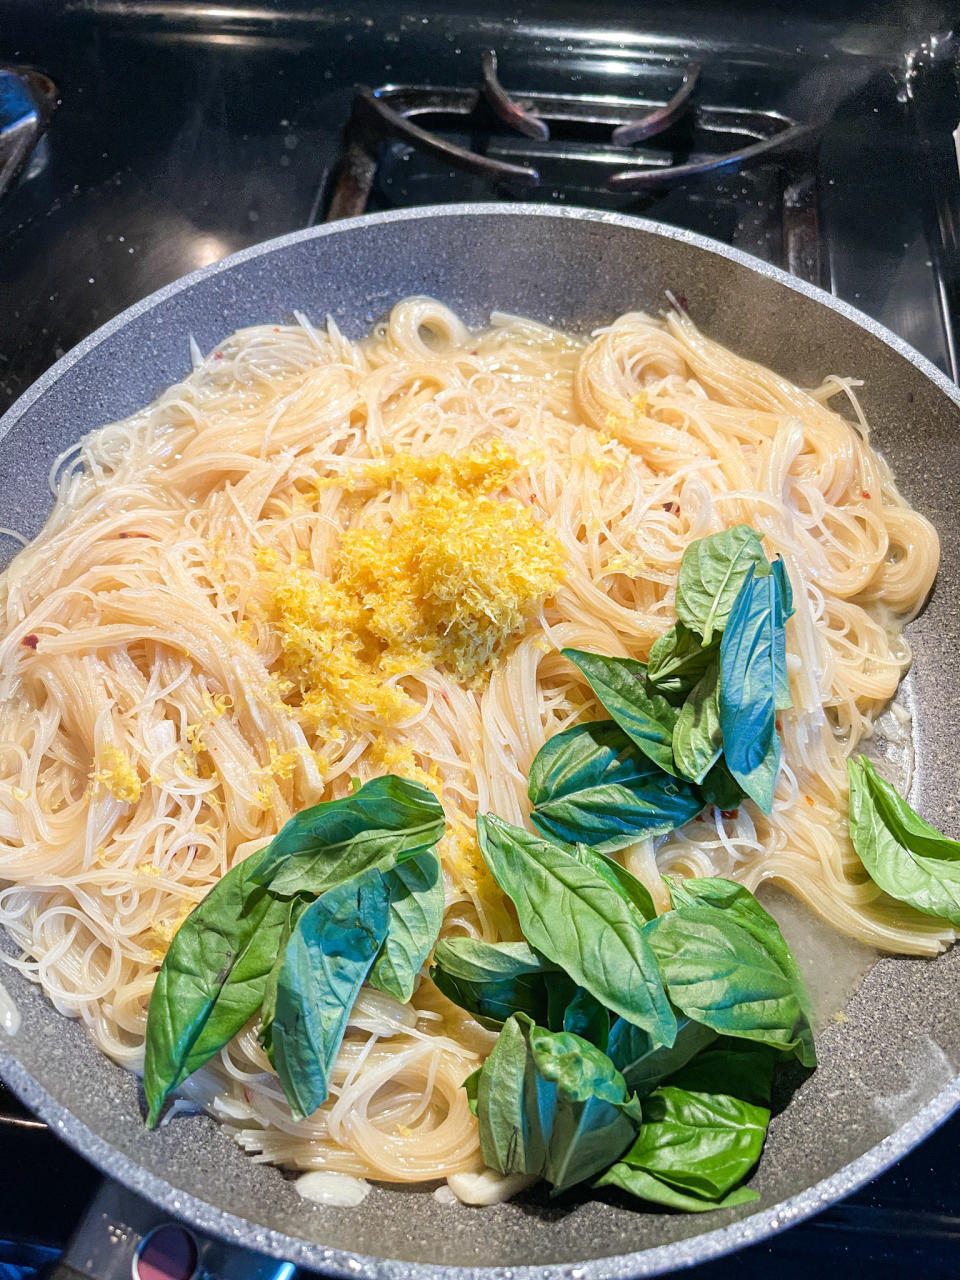 Lemon zest and basil leaves added to pasta in pan